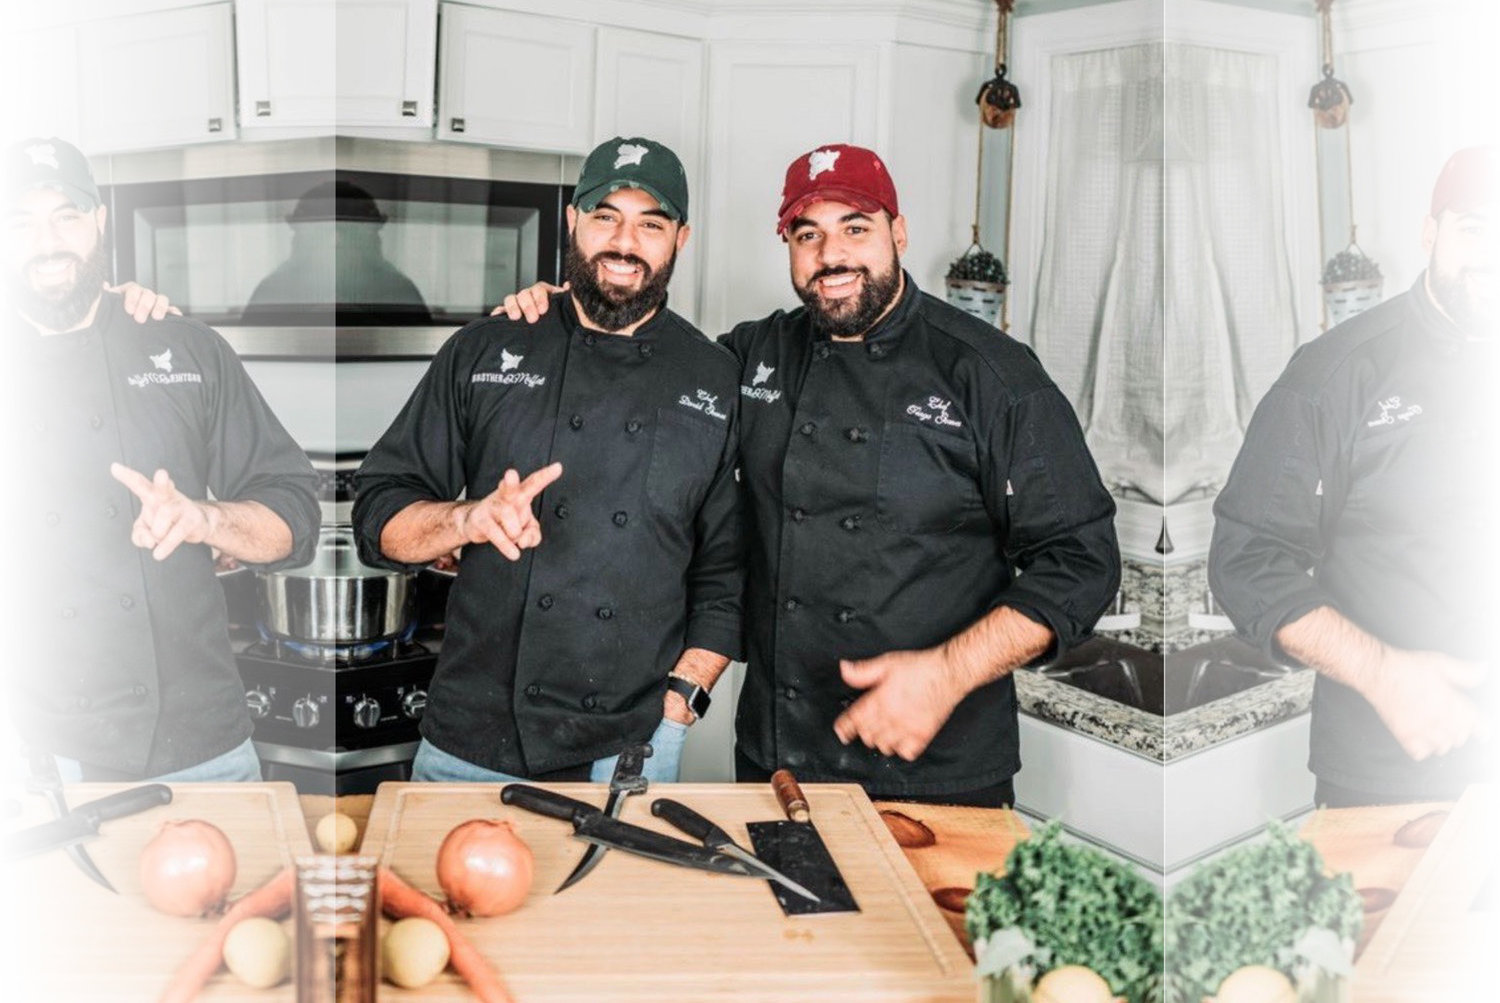 The Gomes brothers specialize in catering outdoor weddings